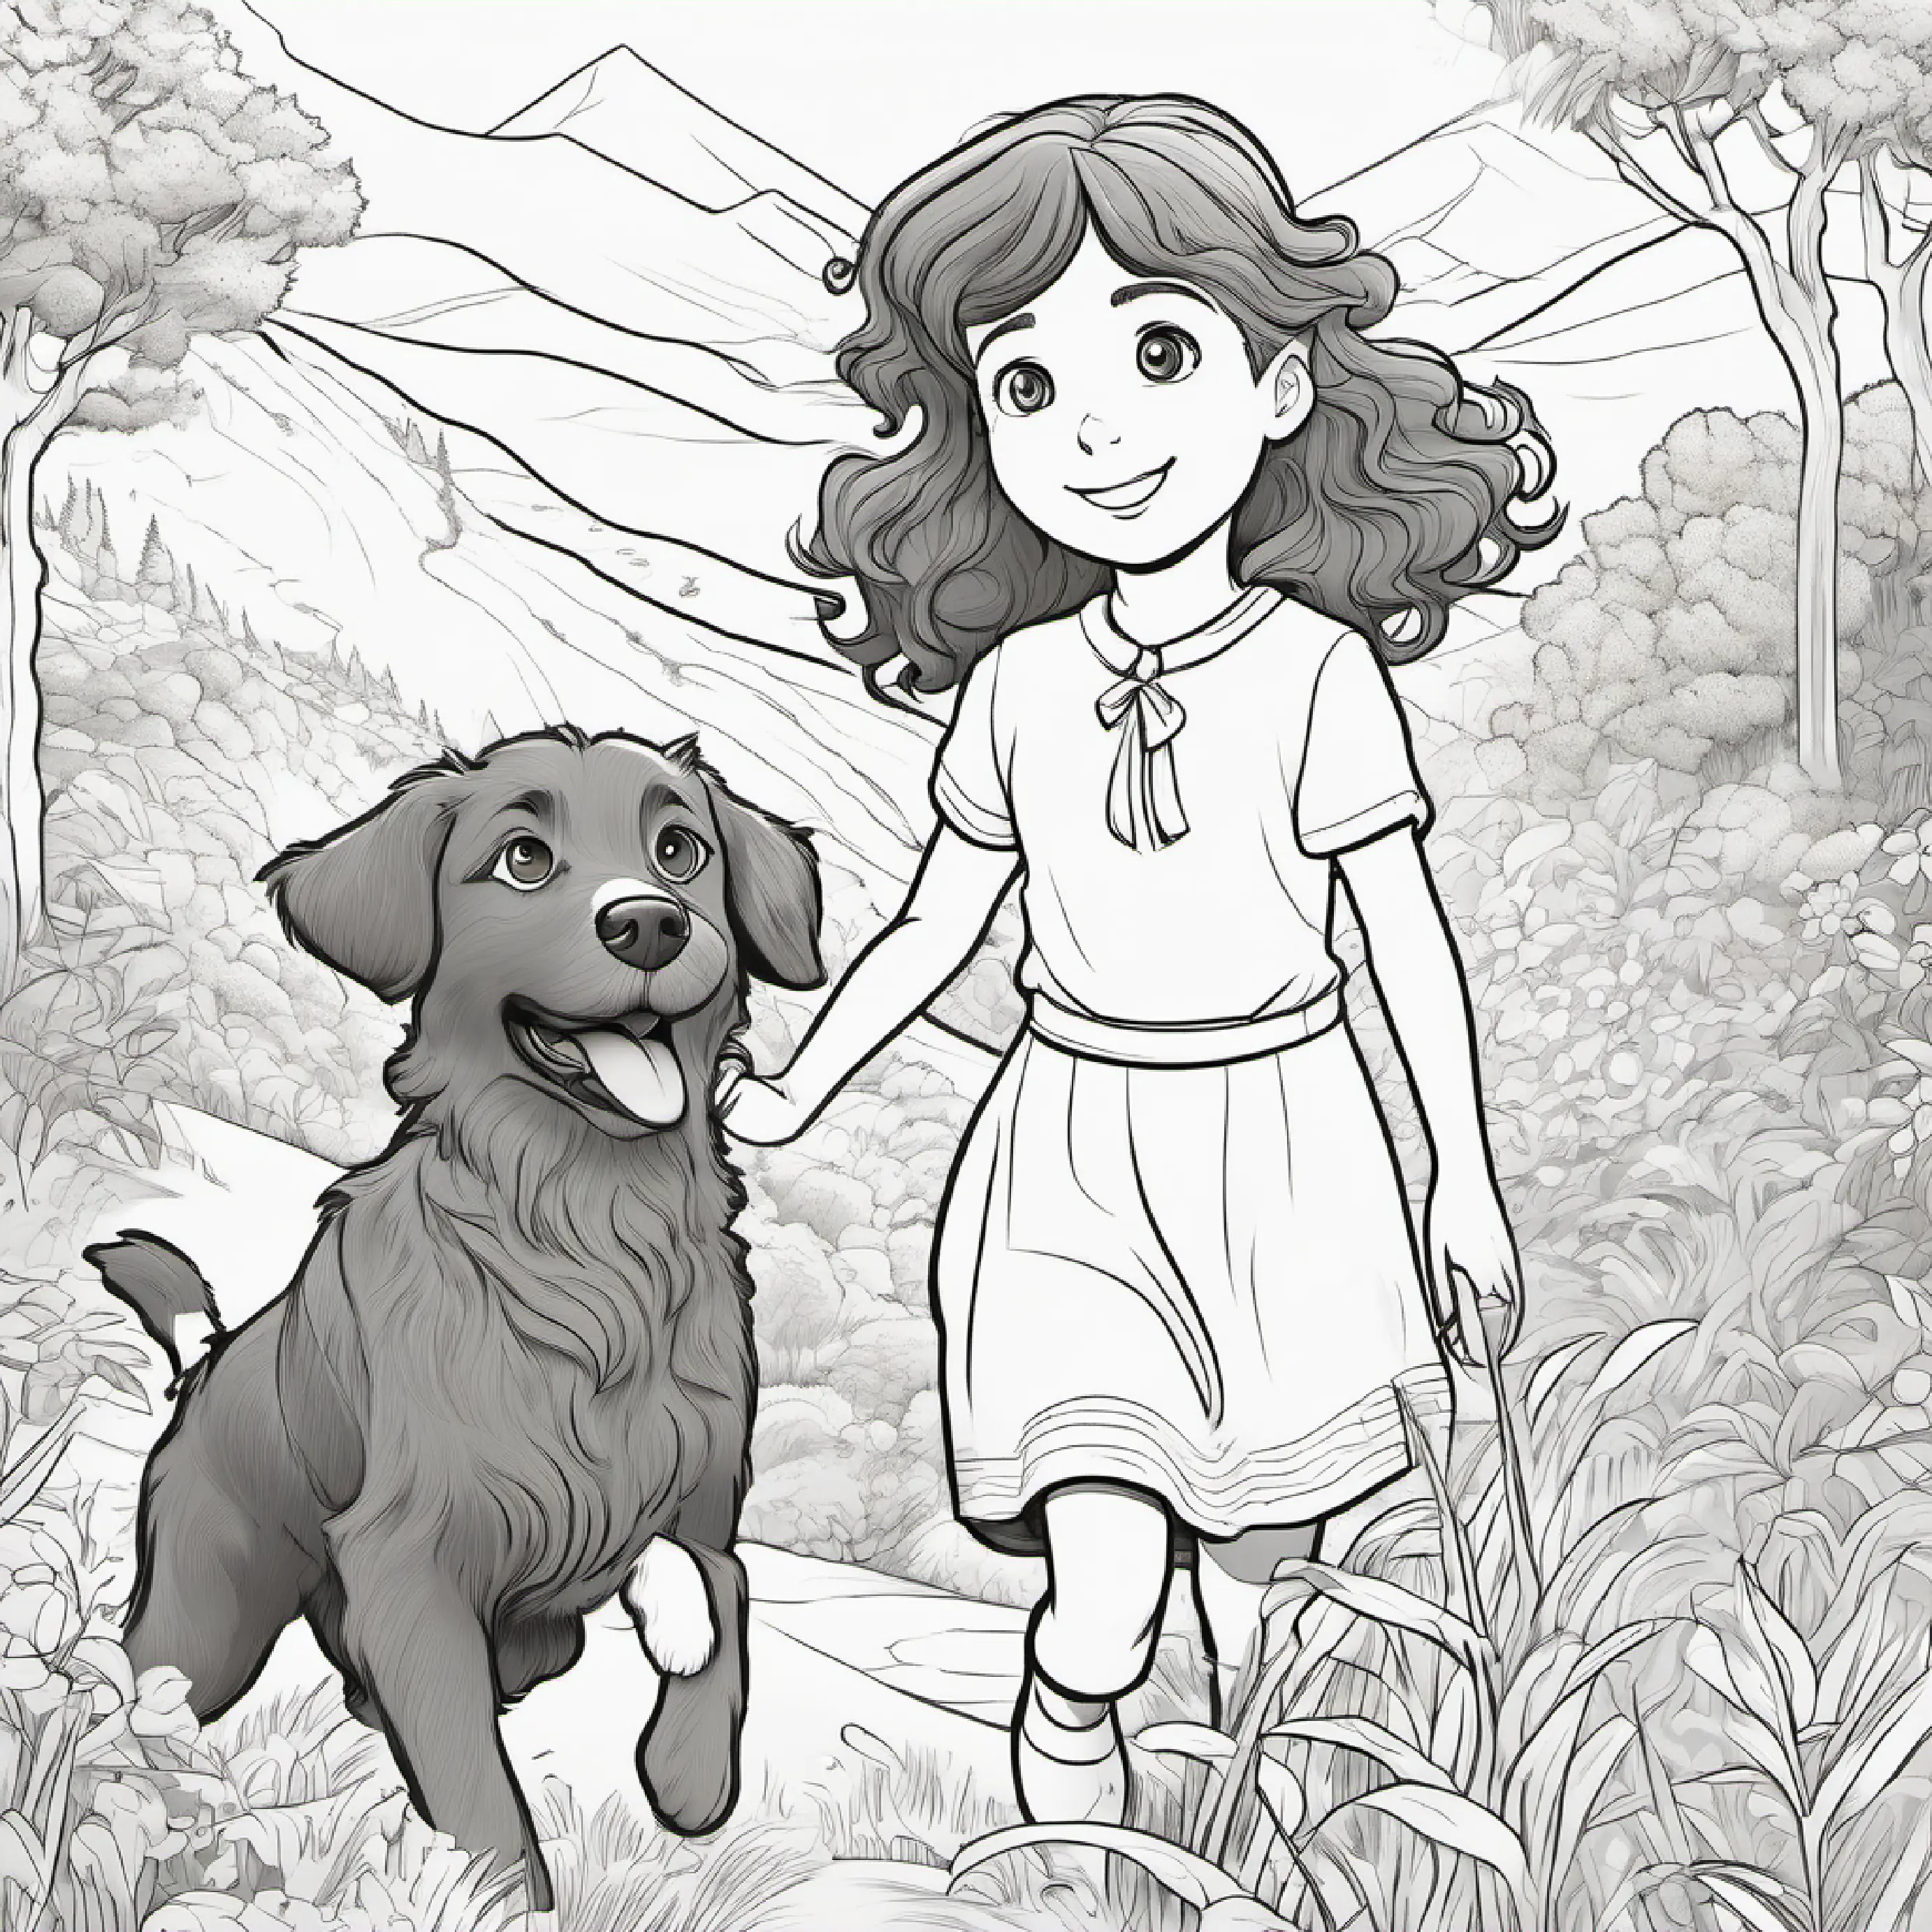 Introduction of Little girl with bright green eyes and curly brown hair and Fluffy brown dog, energetic and playful, playful scene in a valley.